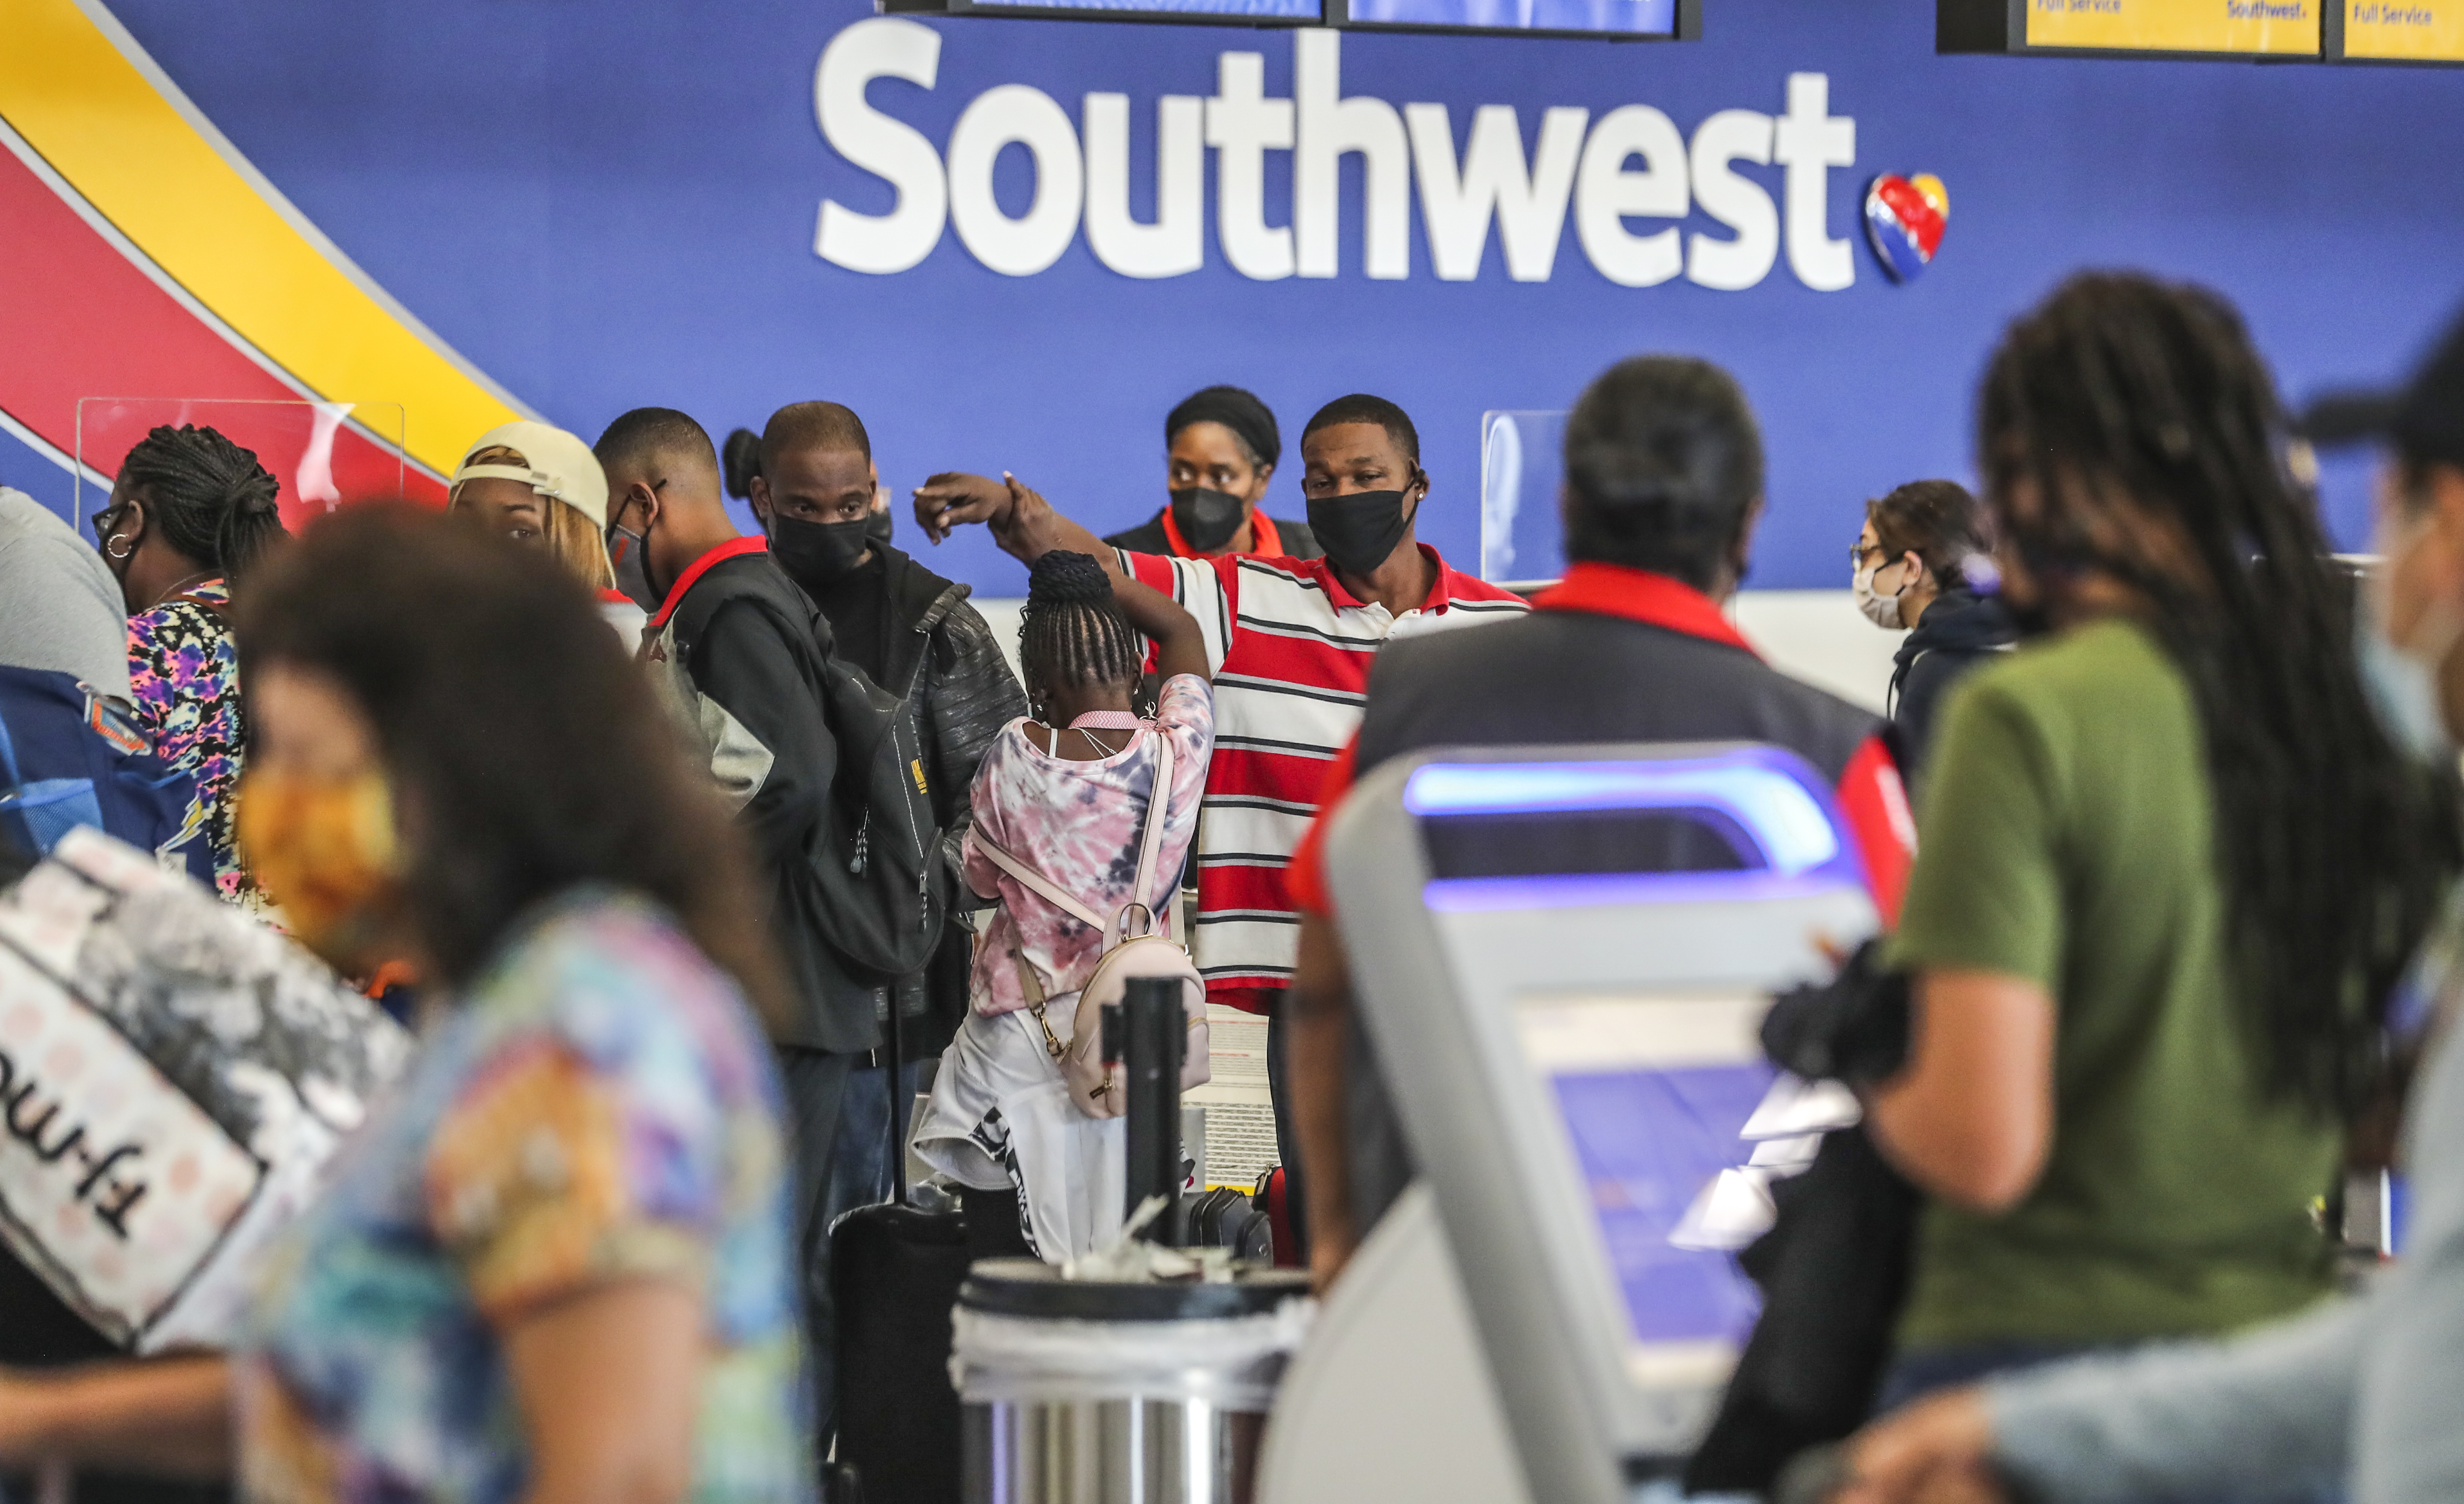 Southwest Airlines After 10 years serving Atlanta airport, scaled-back ambitions image